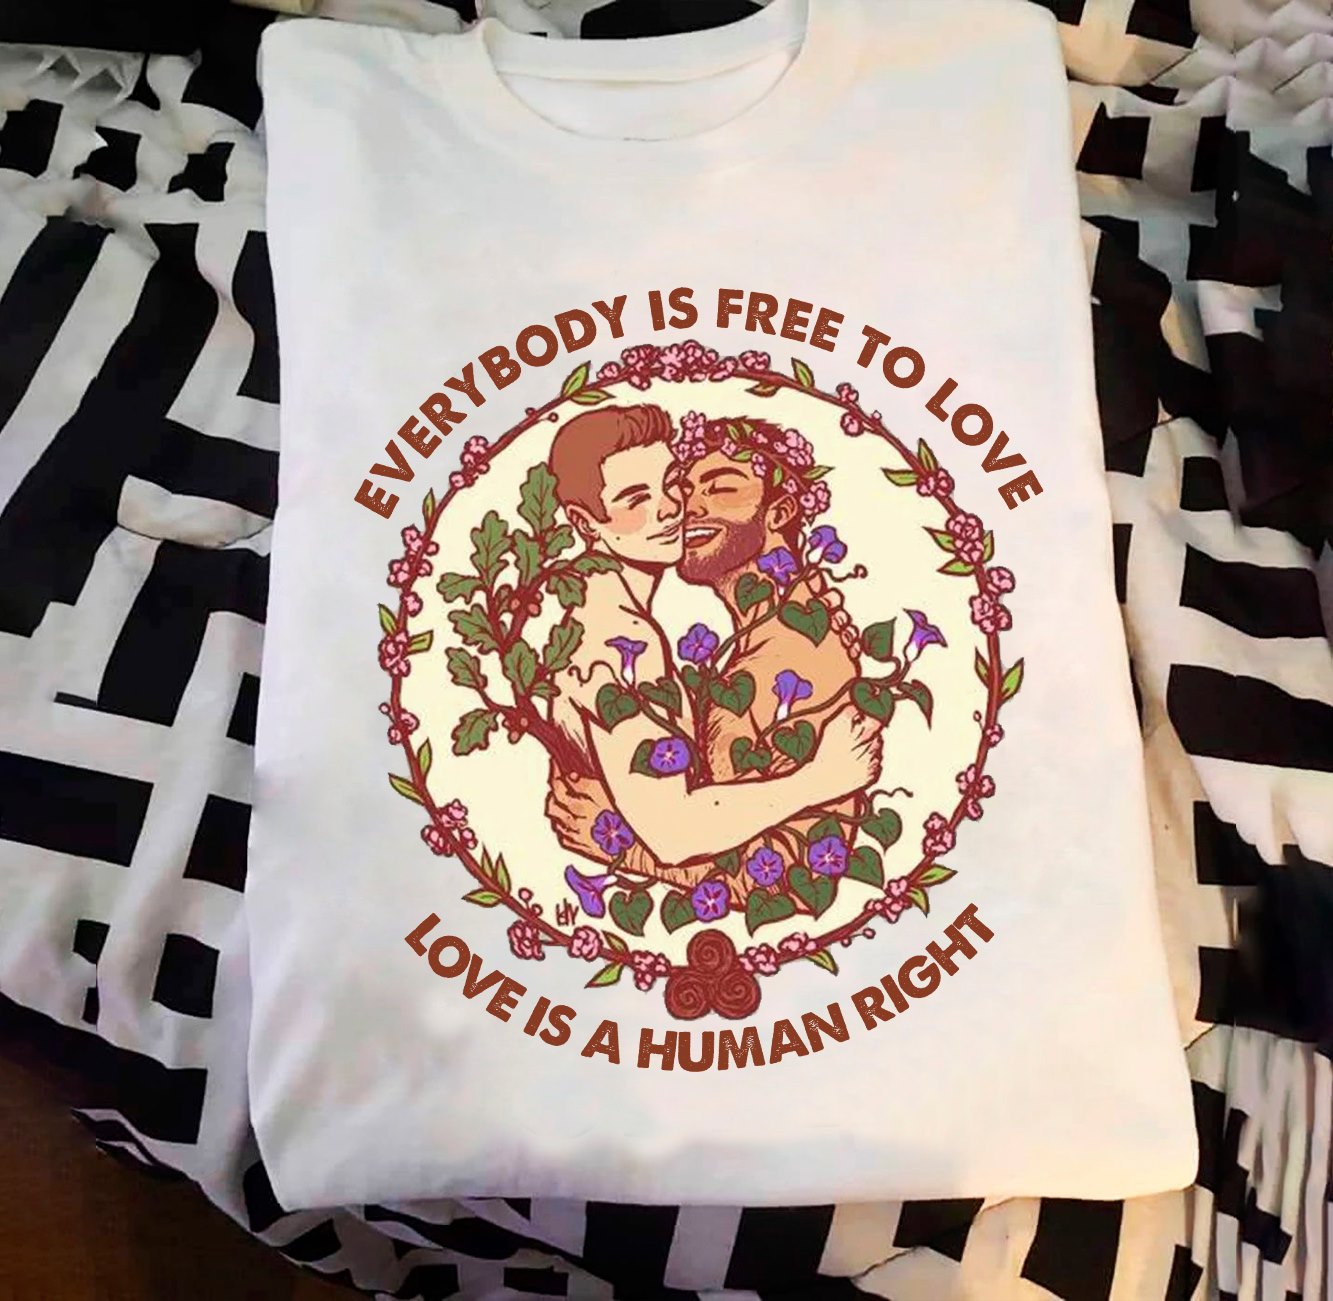 Everybody is free to love Love is a human right - Lgbt community